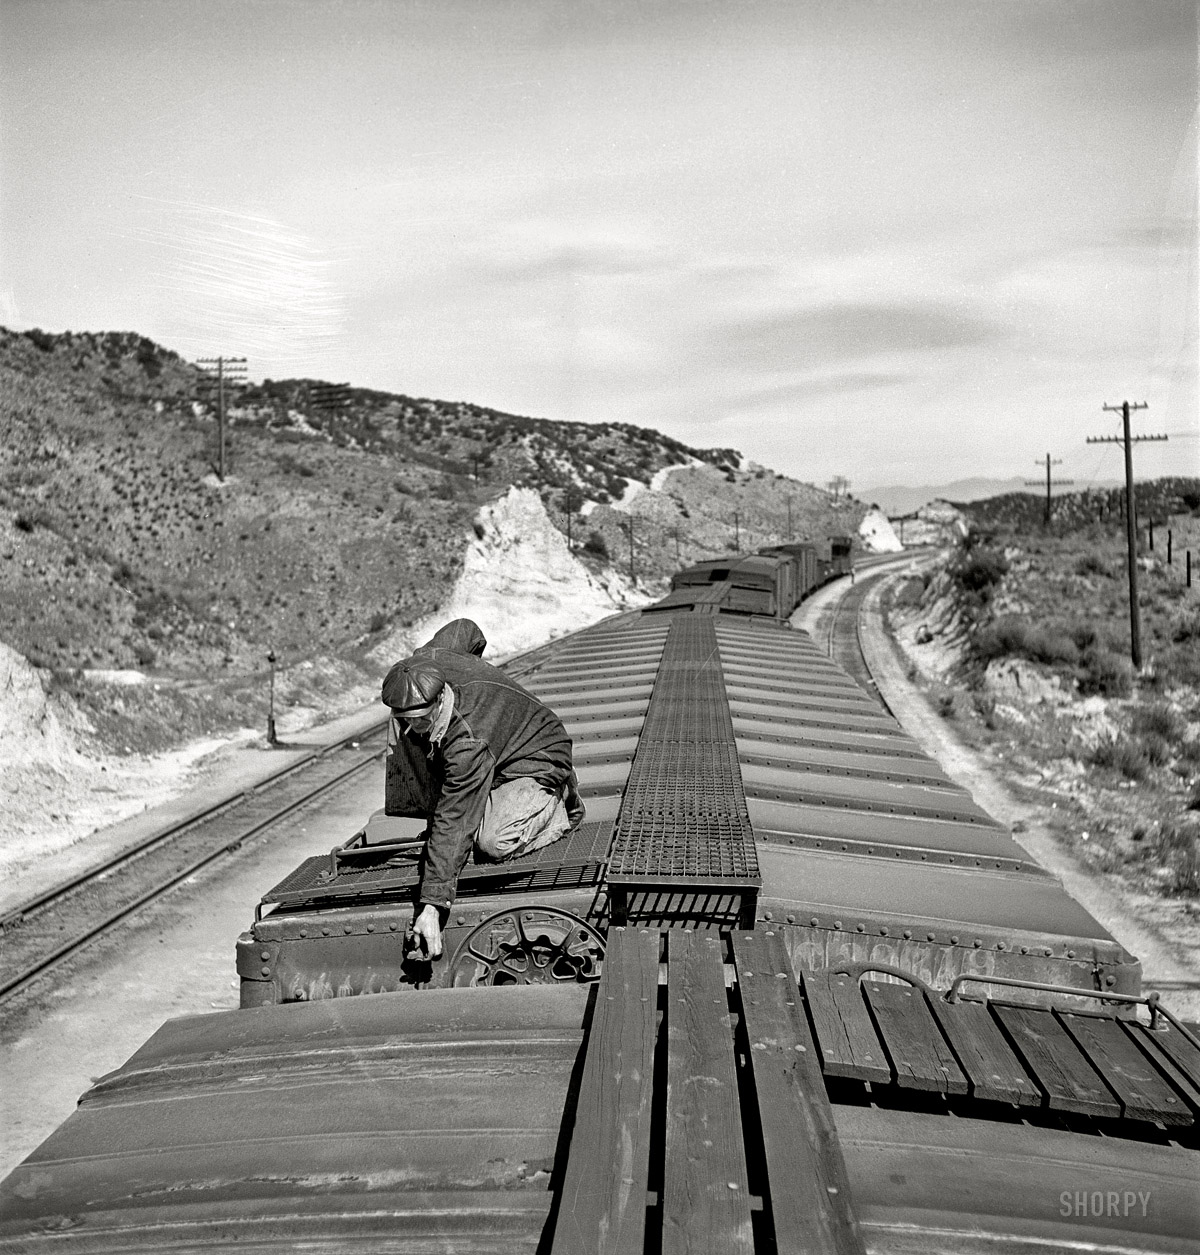 March 1943. Summit, California. "Brakeman opening the retainer valve on a car on the Atchison, Topeka and Santa Fe Railroad between Barstow and San Bernardino. From here to San Bernardino is one long downgrade of more than 2,700 feet." Photo by Jack Delano, Office of War Information. View full size.